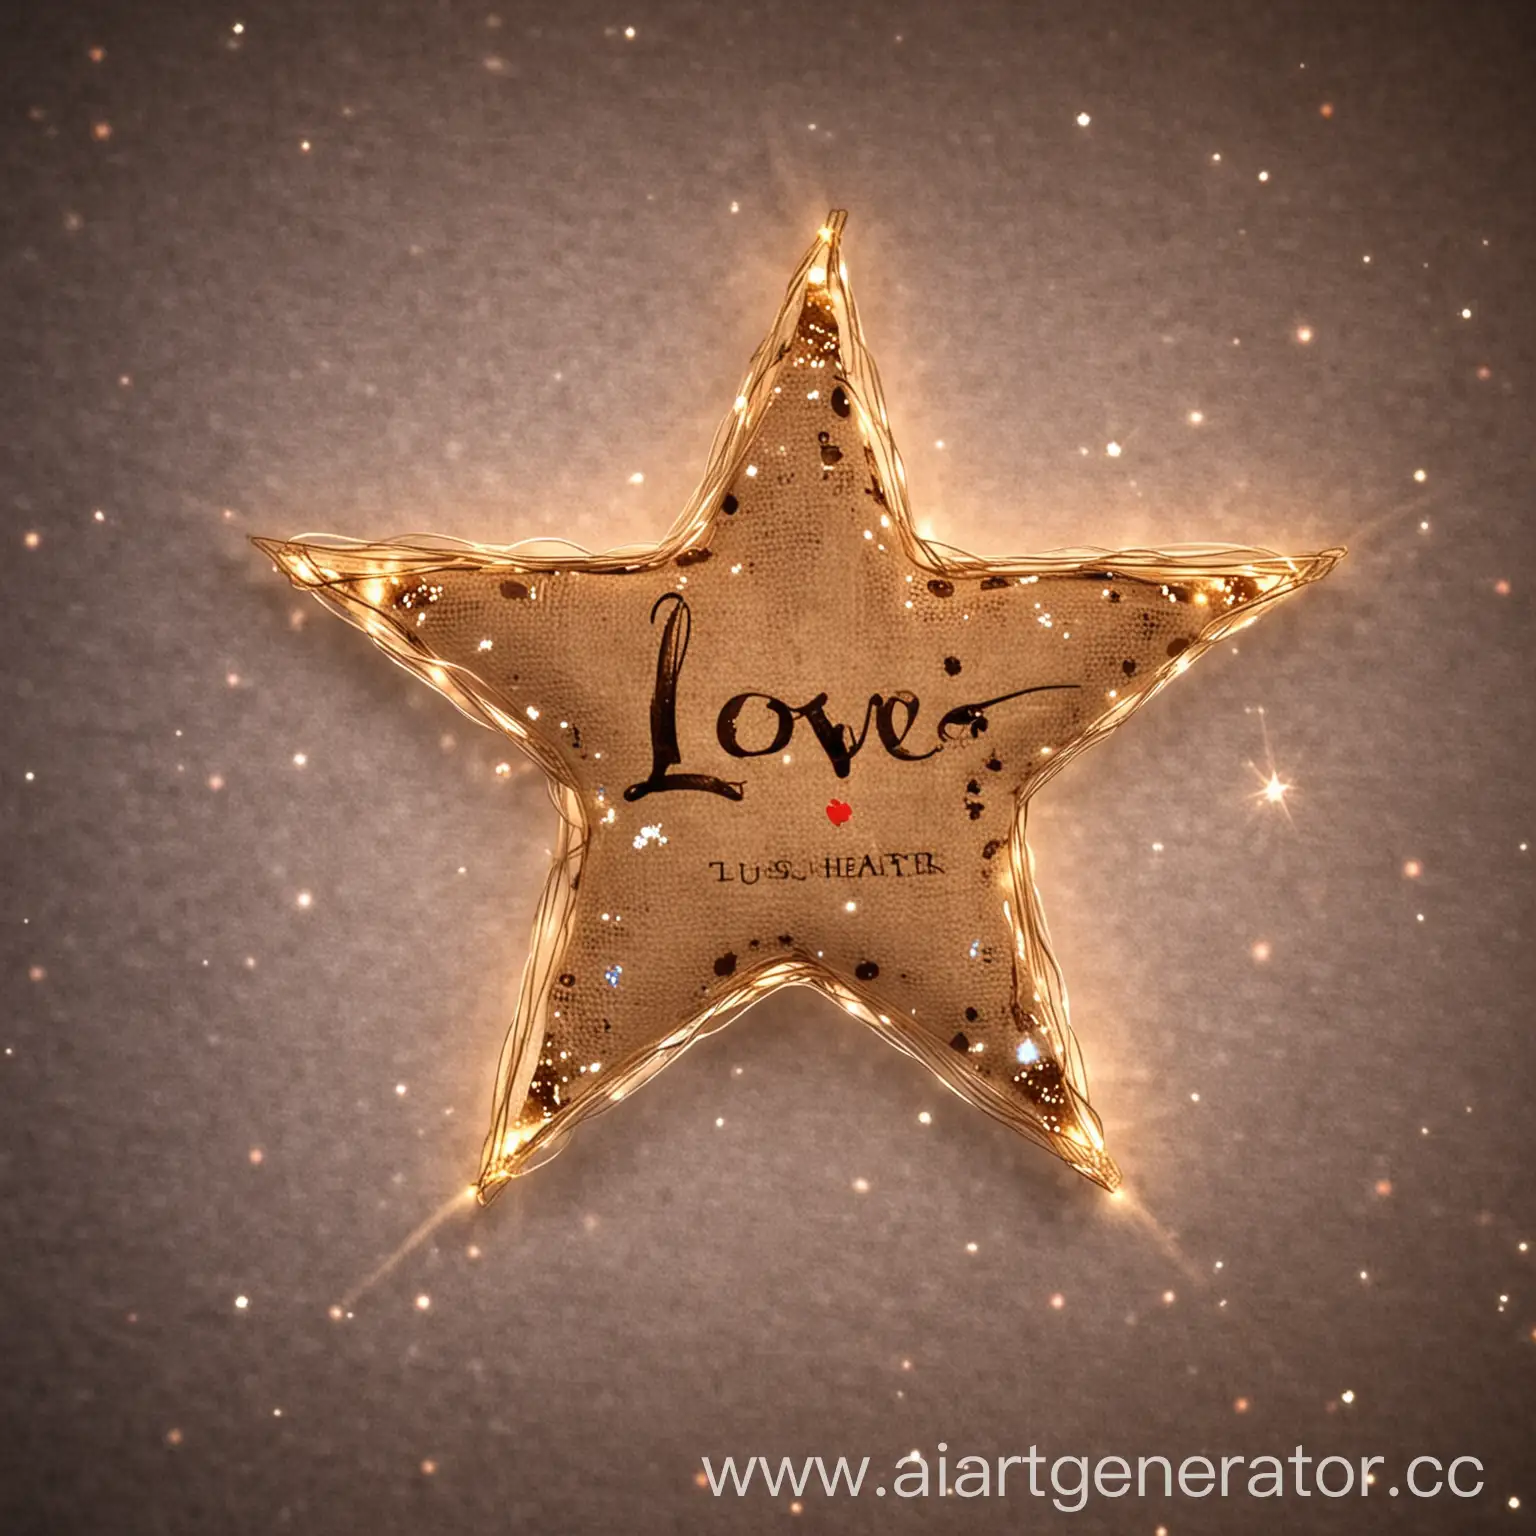 Love is a star in our hearts